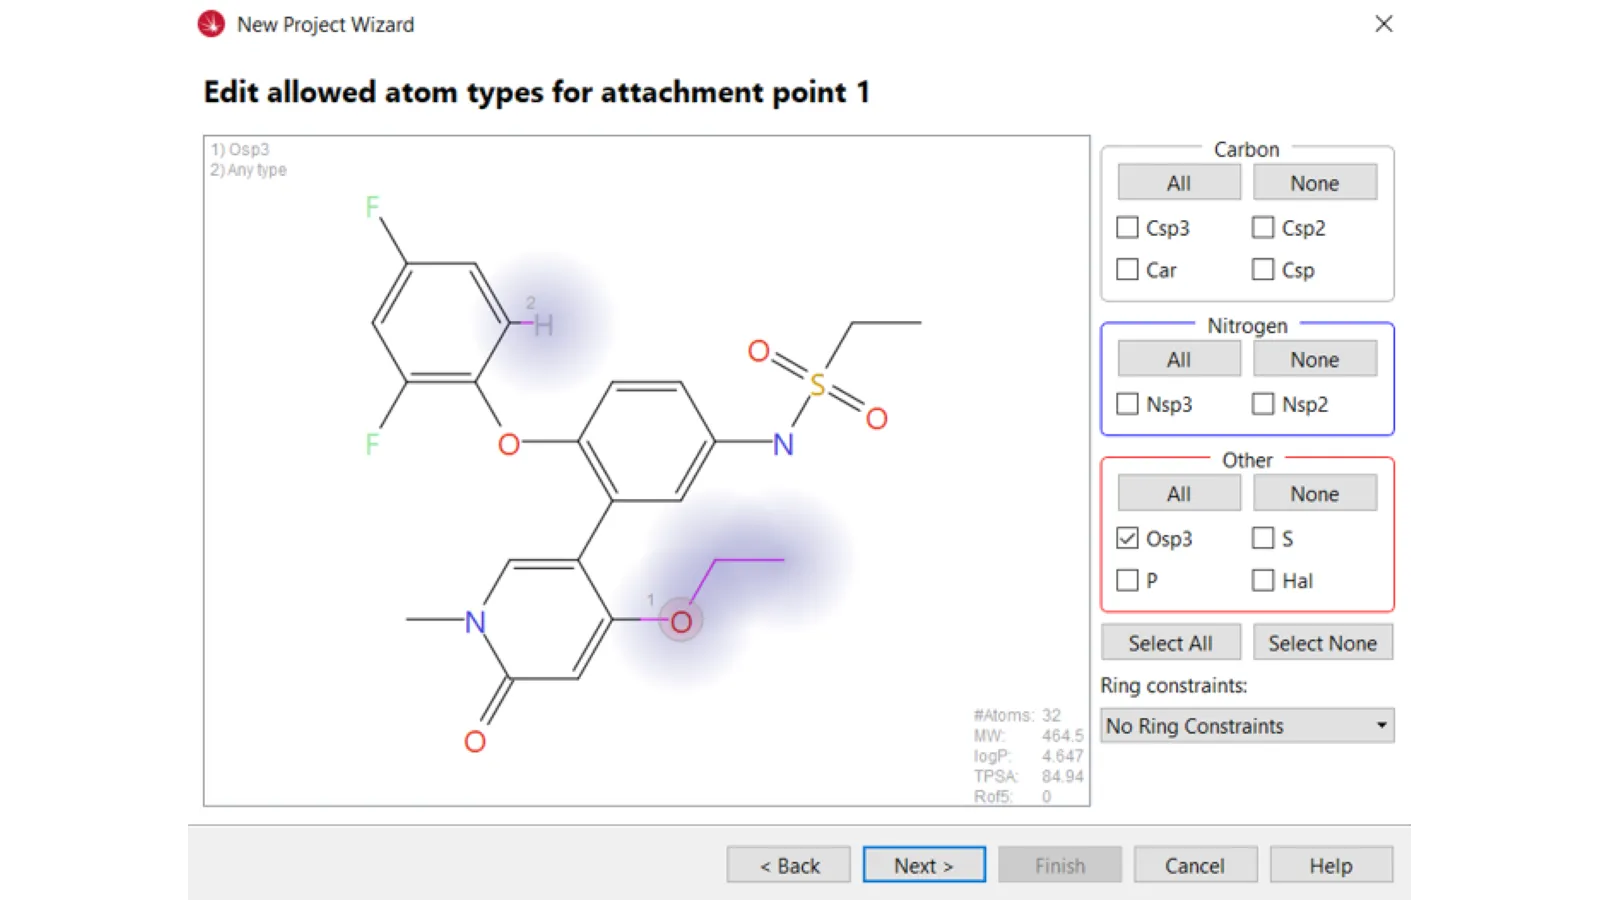 Defining the allowed atom types at each attachment point in the macrocyclization experiment.